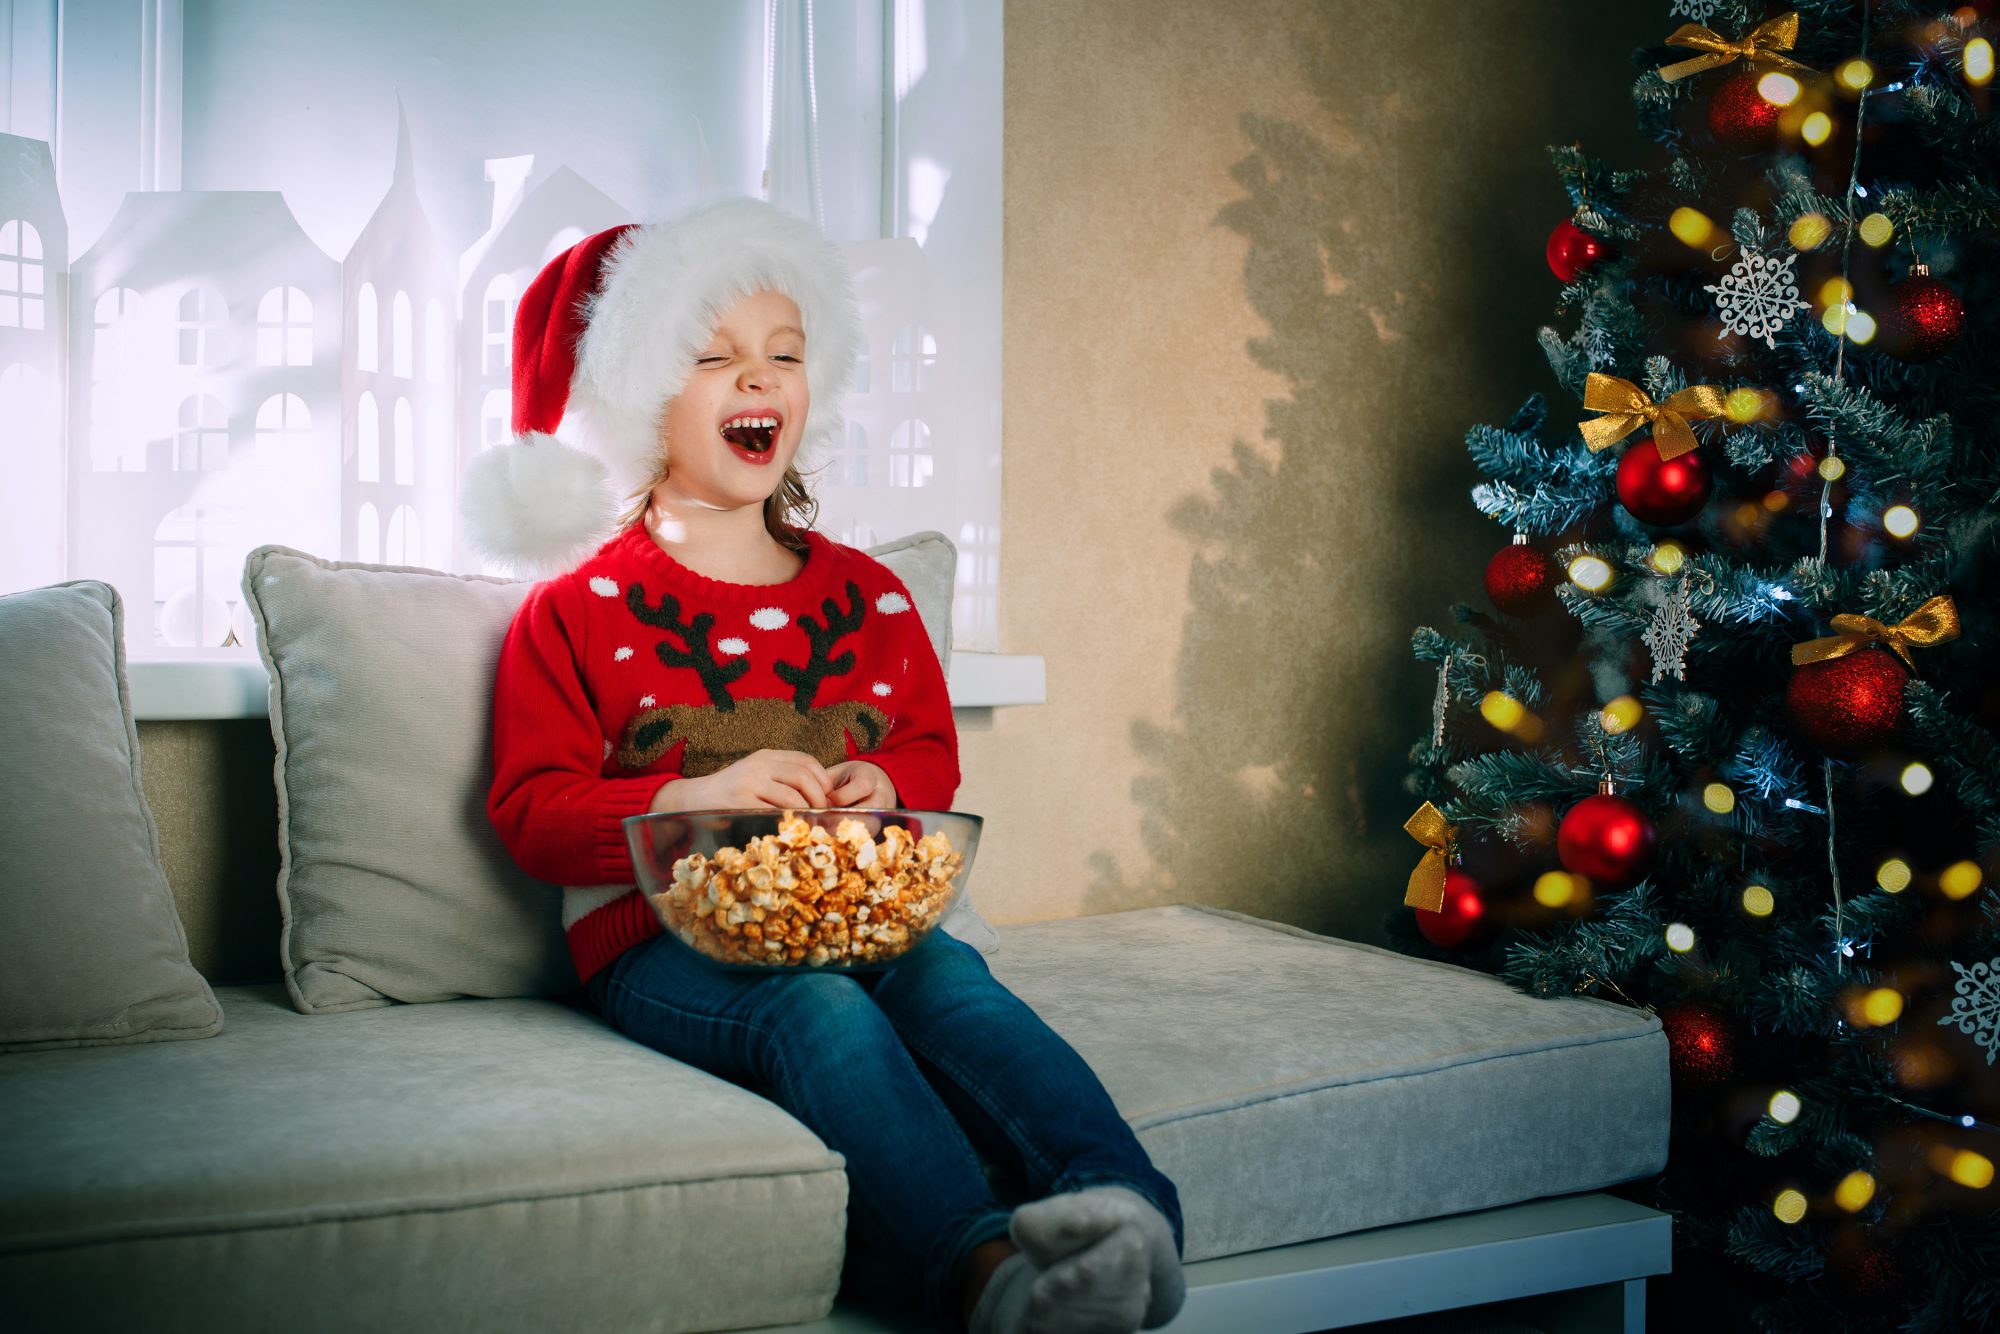 An image of a girl in a Santa Claus hat while watching TV.